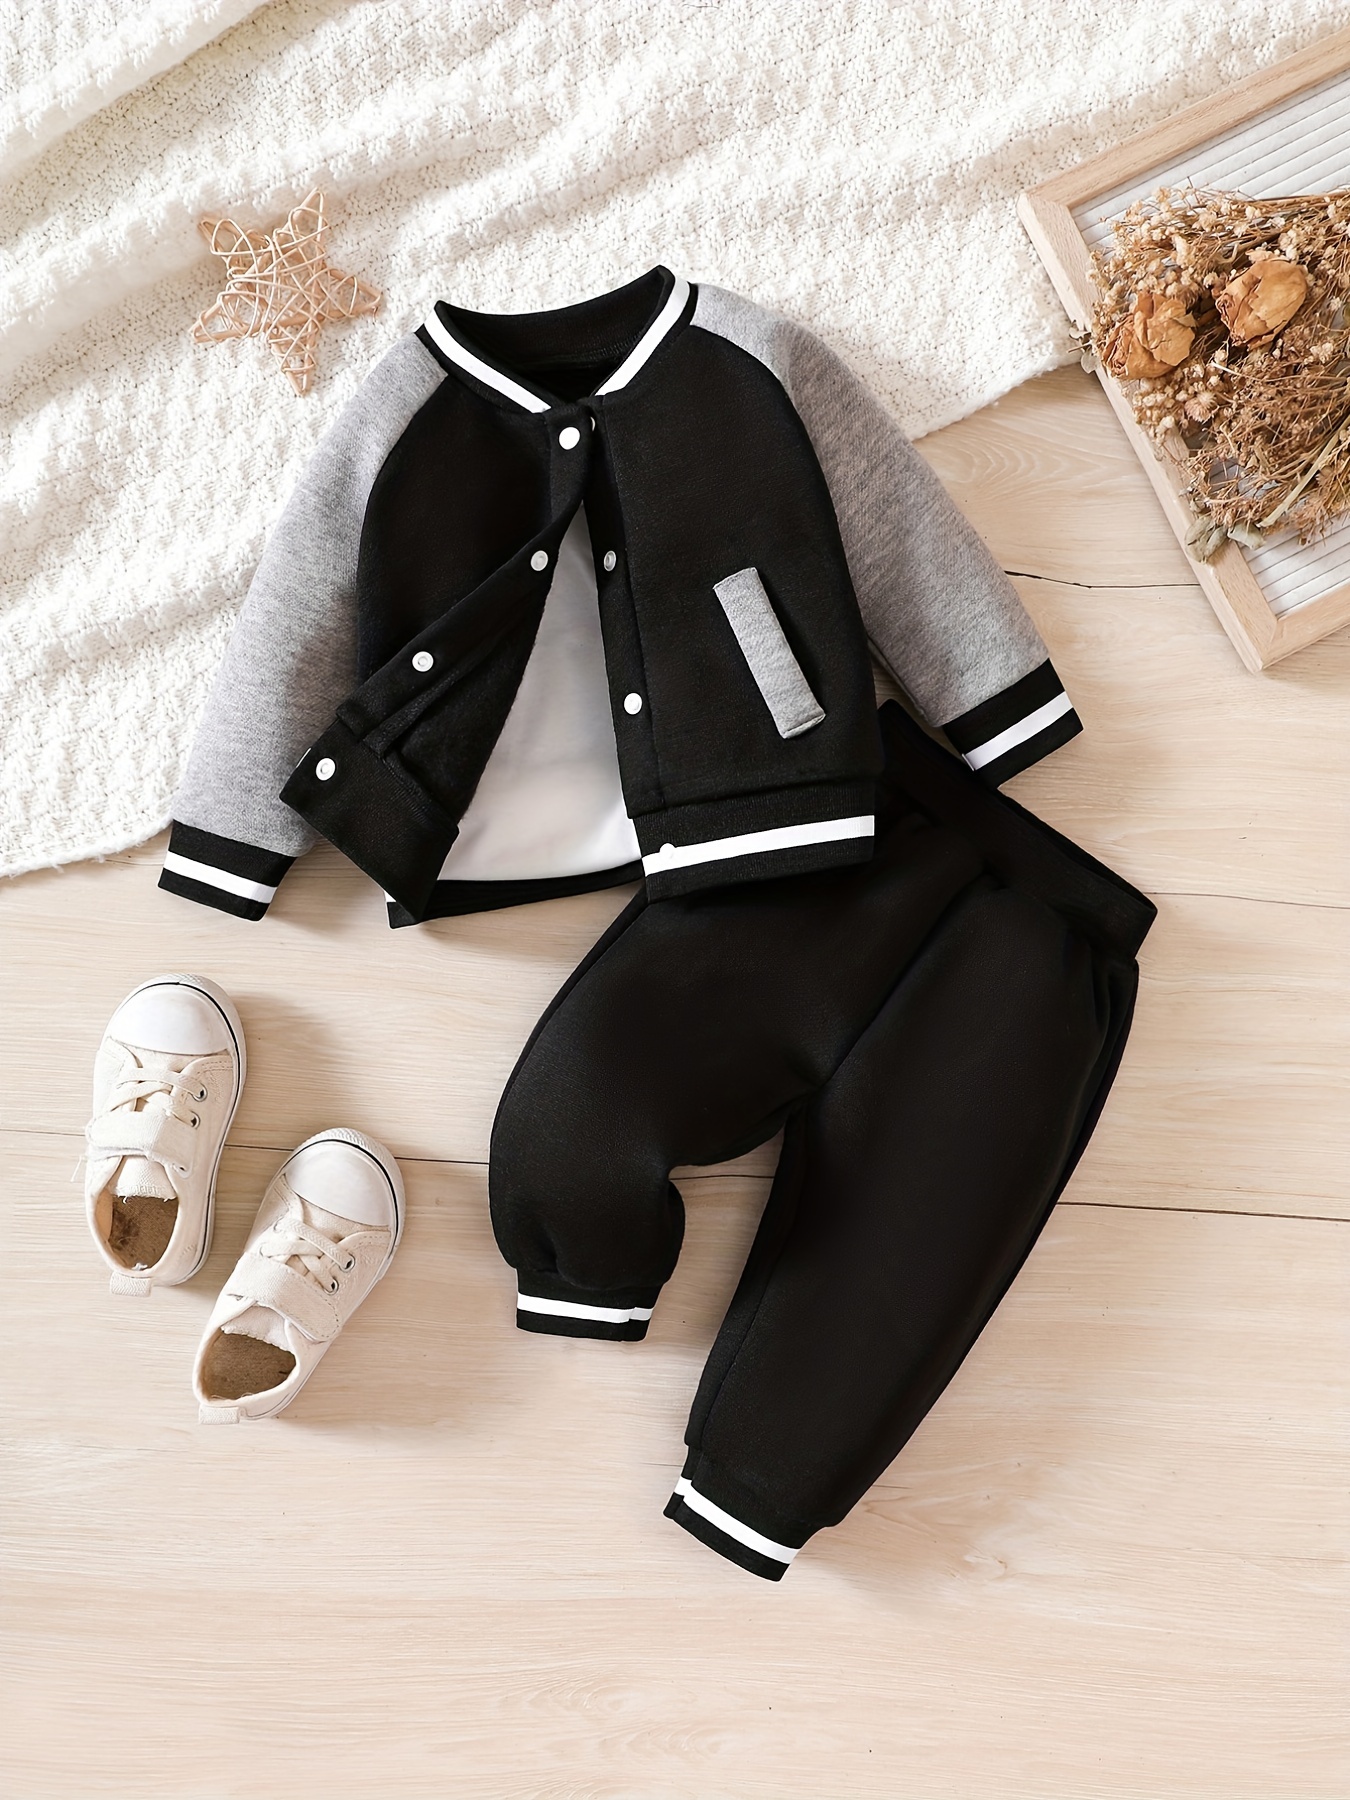 Infant Baby Casual Baseball Clothes Sports Set, 2pcs Baby Color Contrast  Sweatshirt Jacket Coat Trousers Outfit